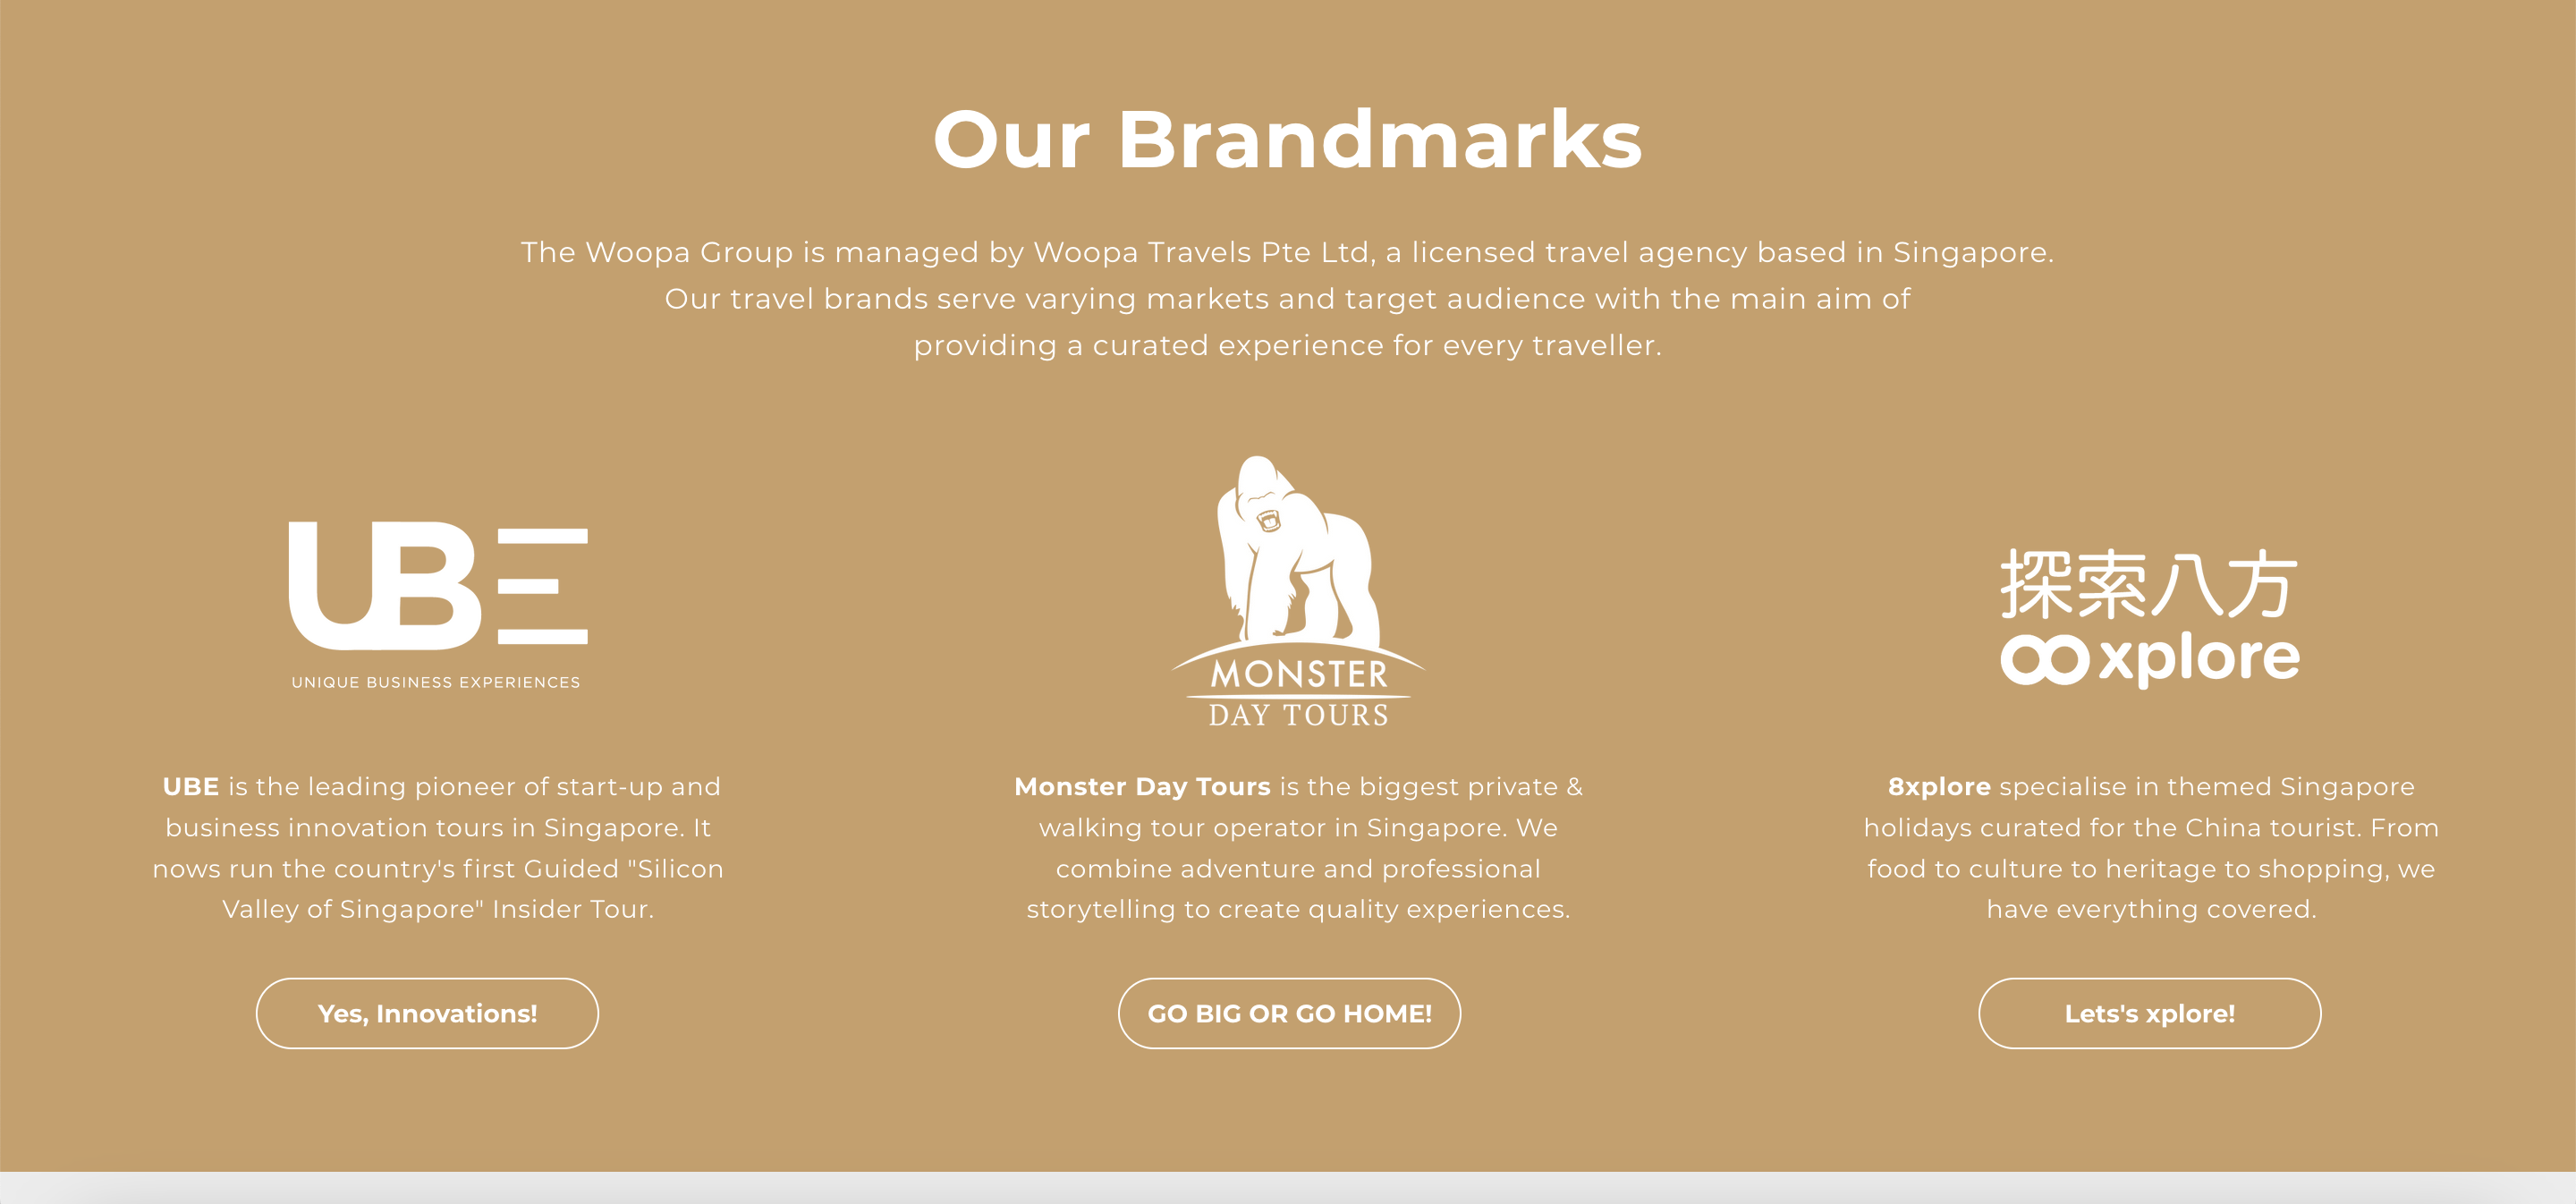 The Woopa Group